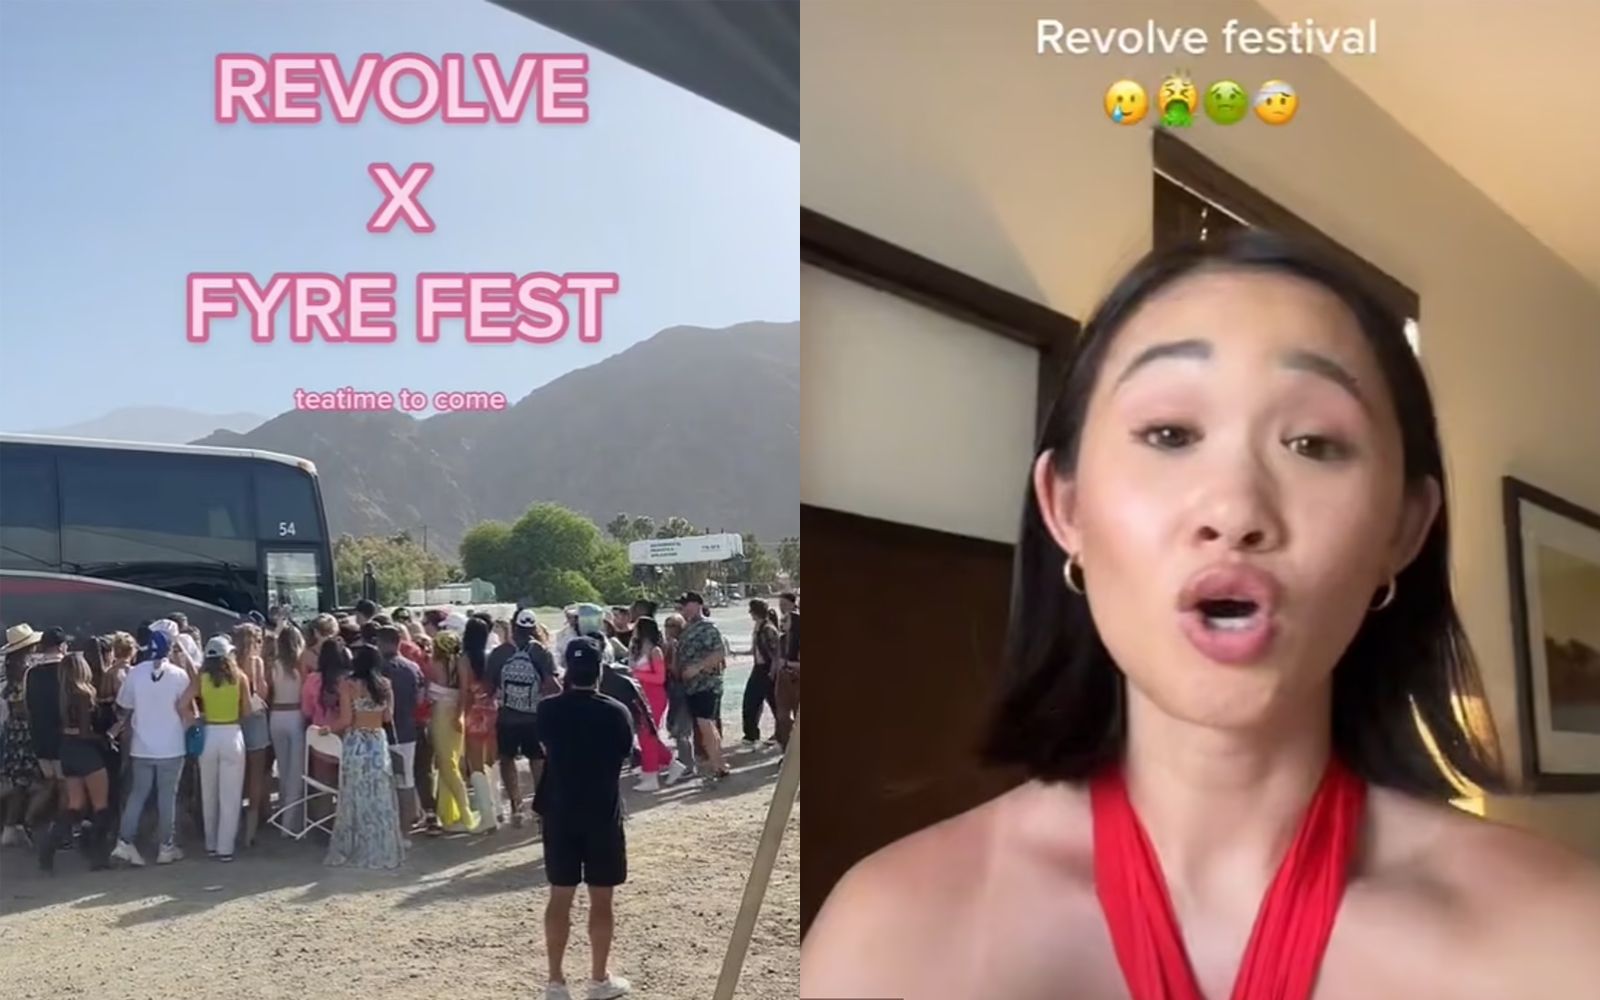 The Revolve Festival was a disaster